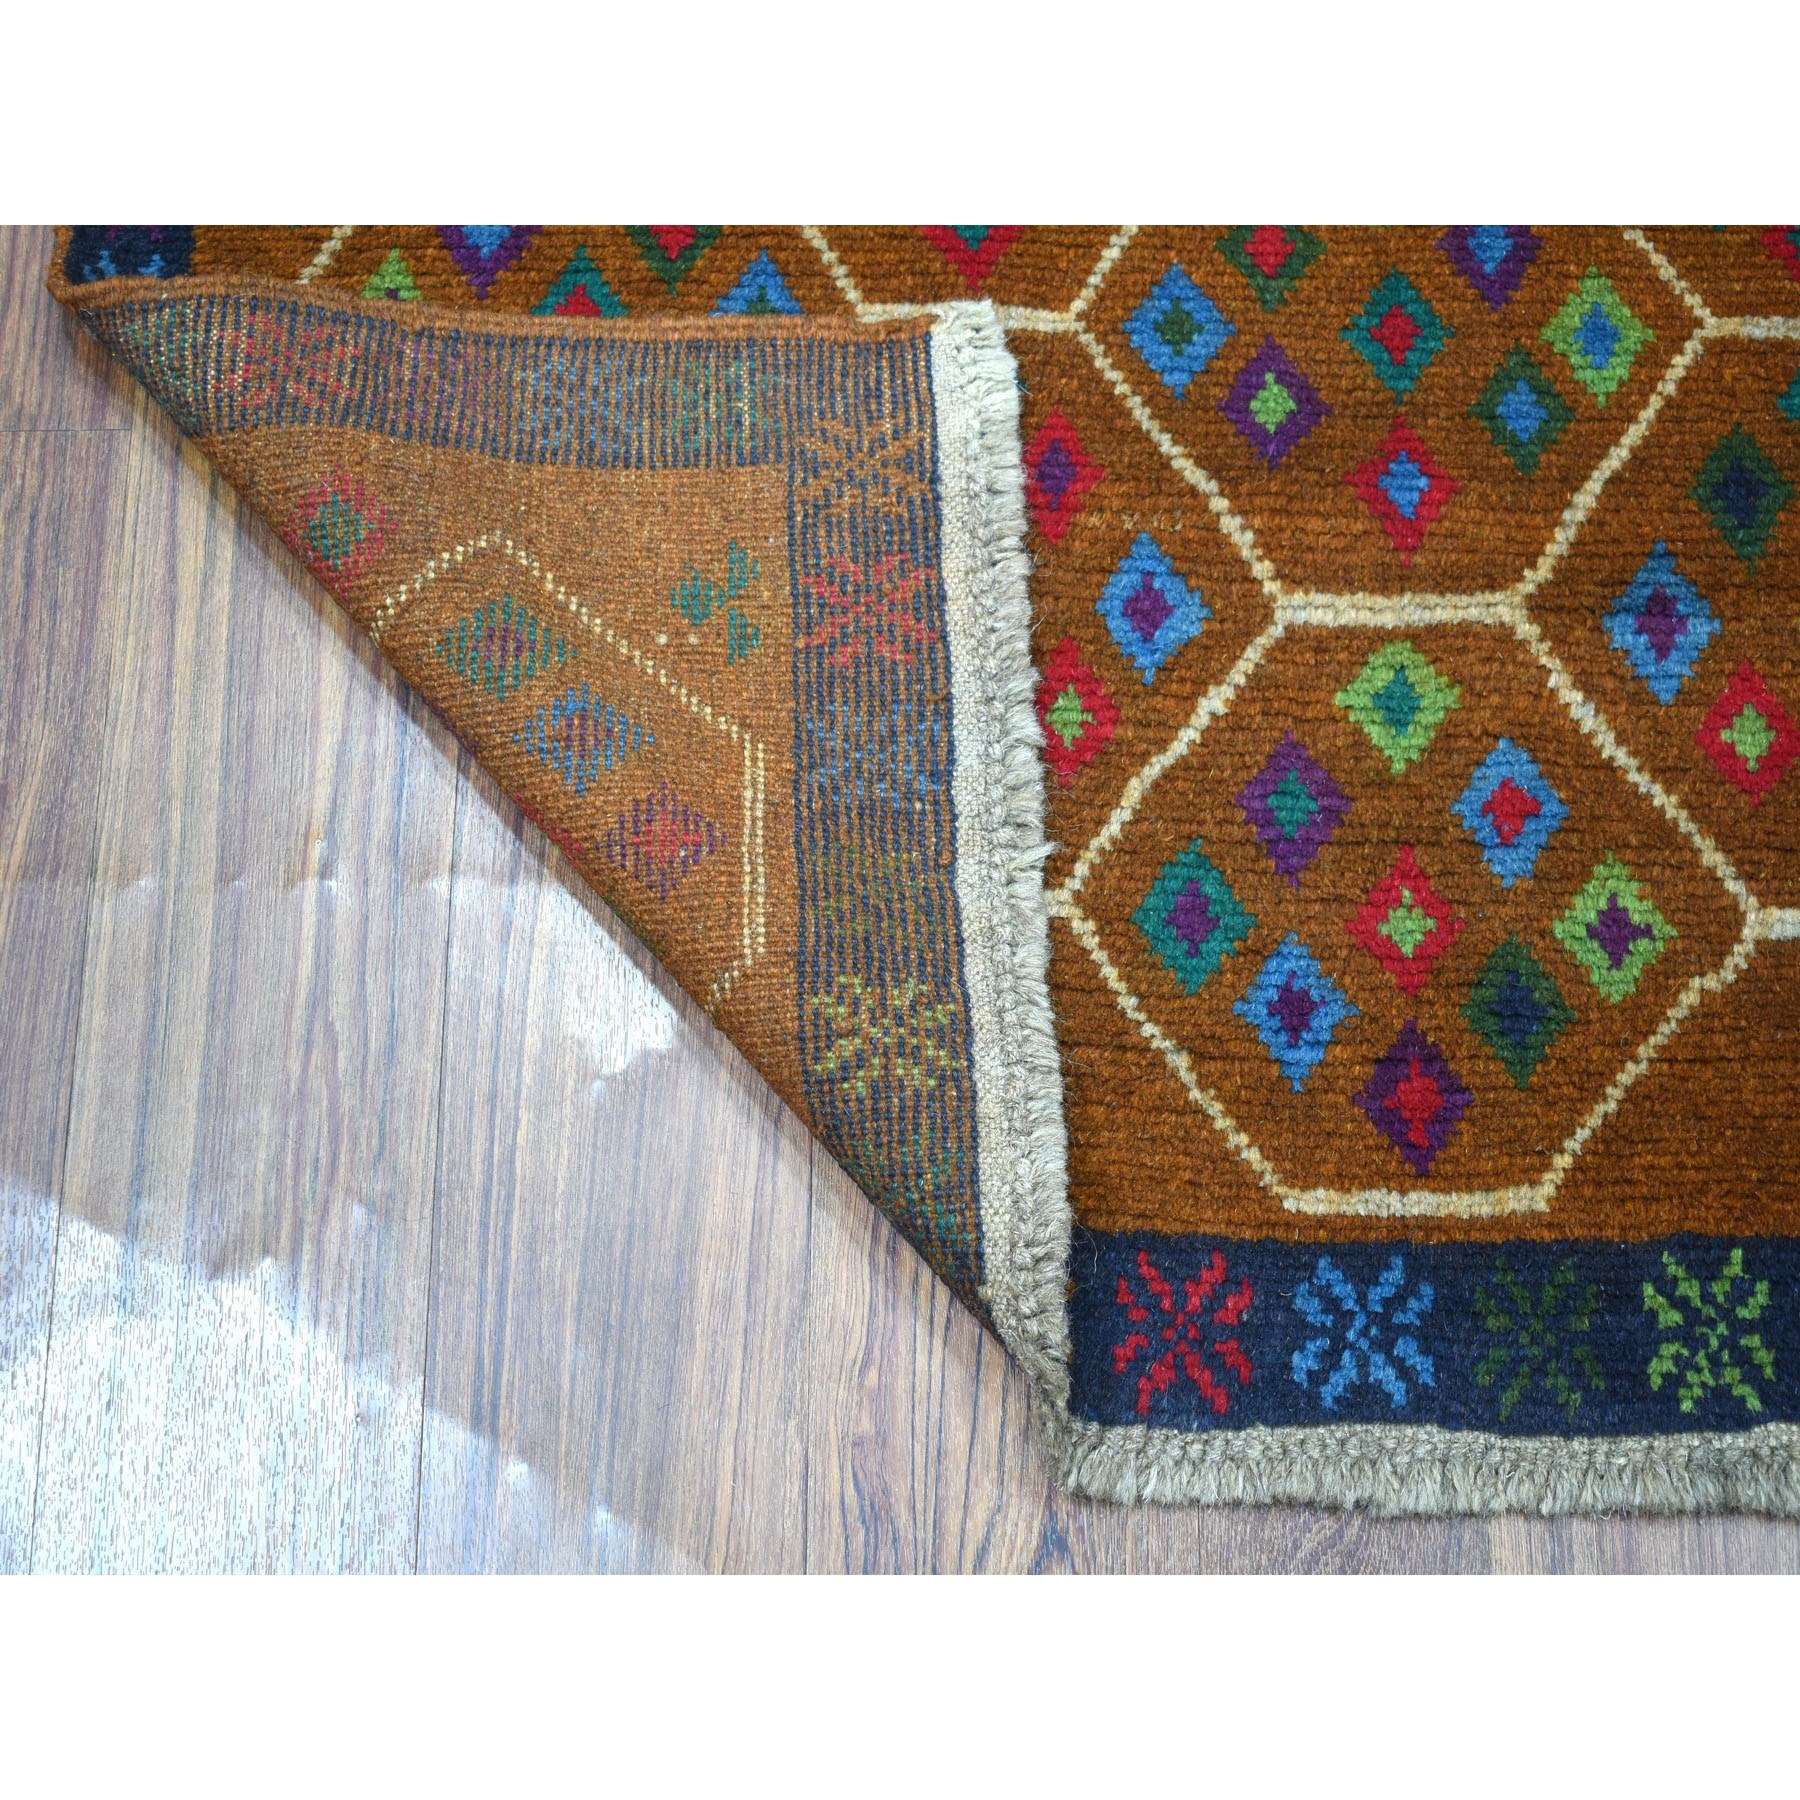 4'x6' Brown Colorful Afghan Baluch Tribal Design Hand Woven 100% Wool Oriental Rug 